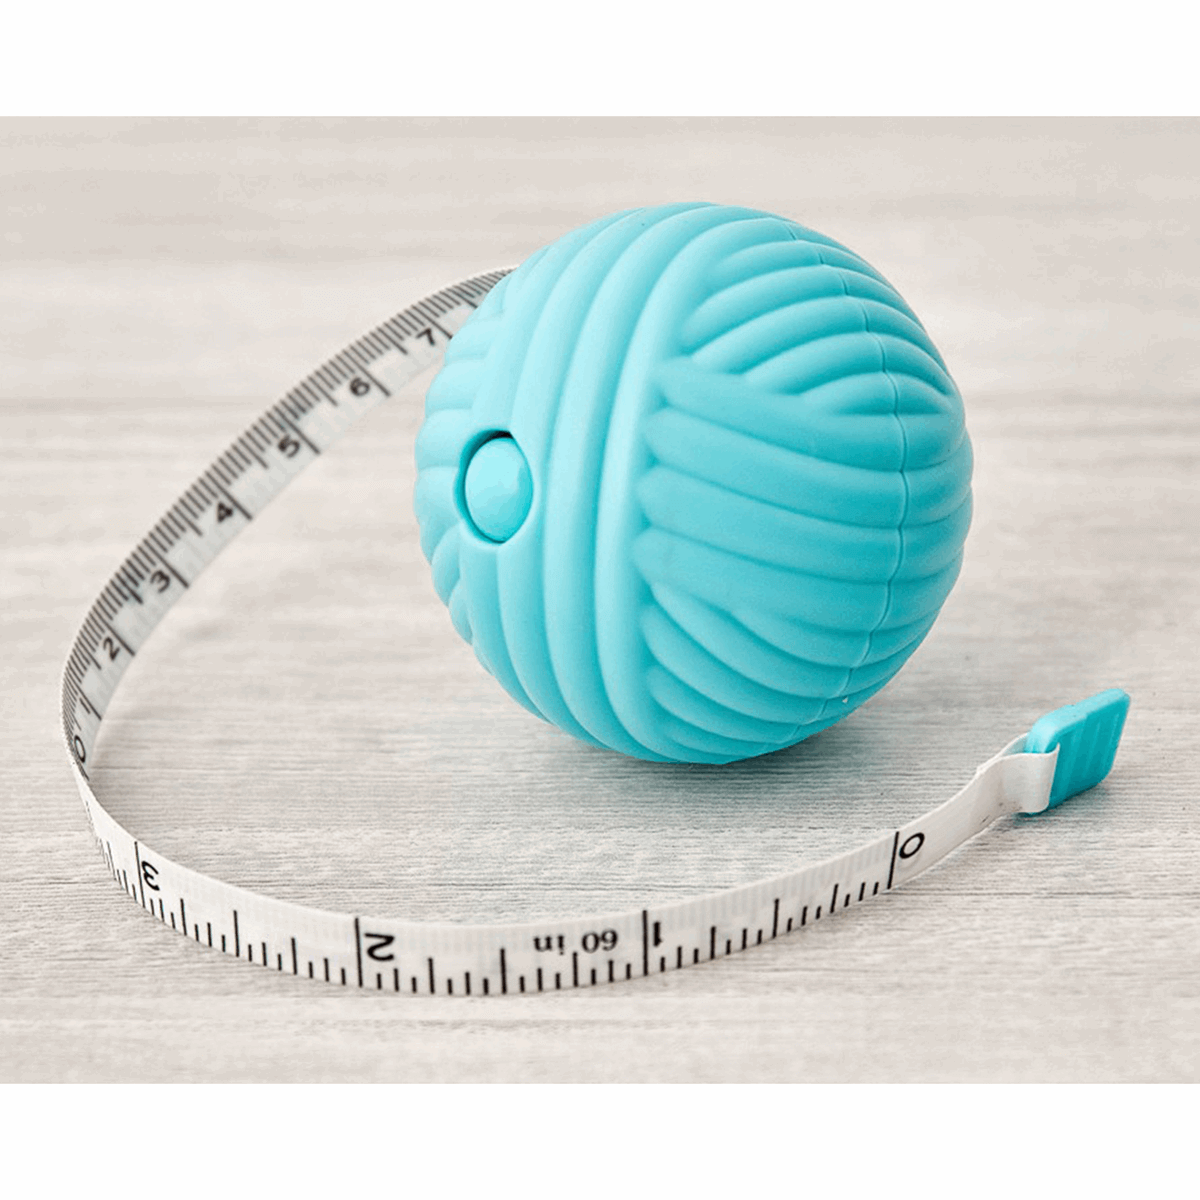 Yarn Ball/ Wool Retractable Tape Measure. Sewing, knitting and other crafts. 60 in/150 cm.